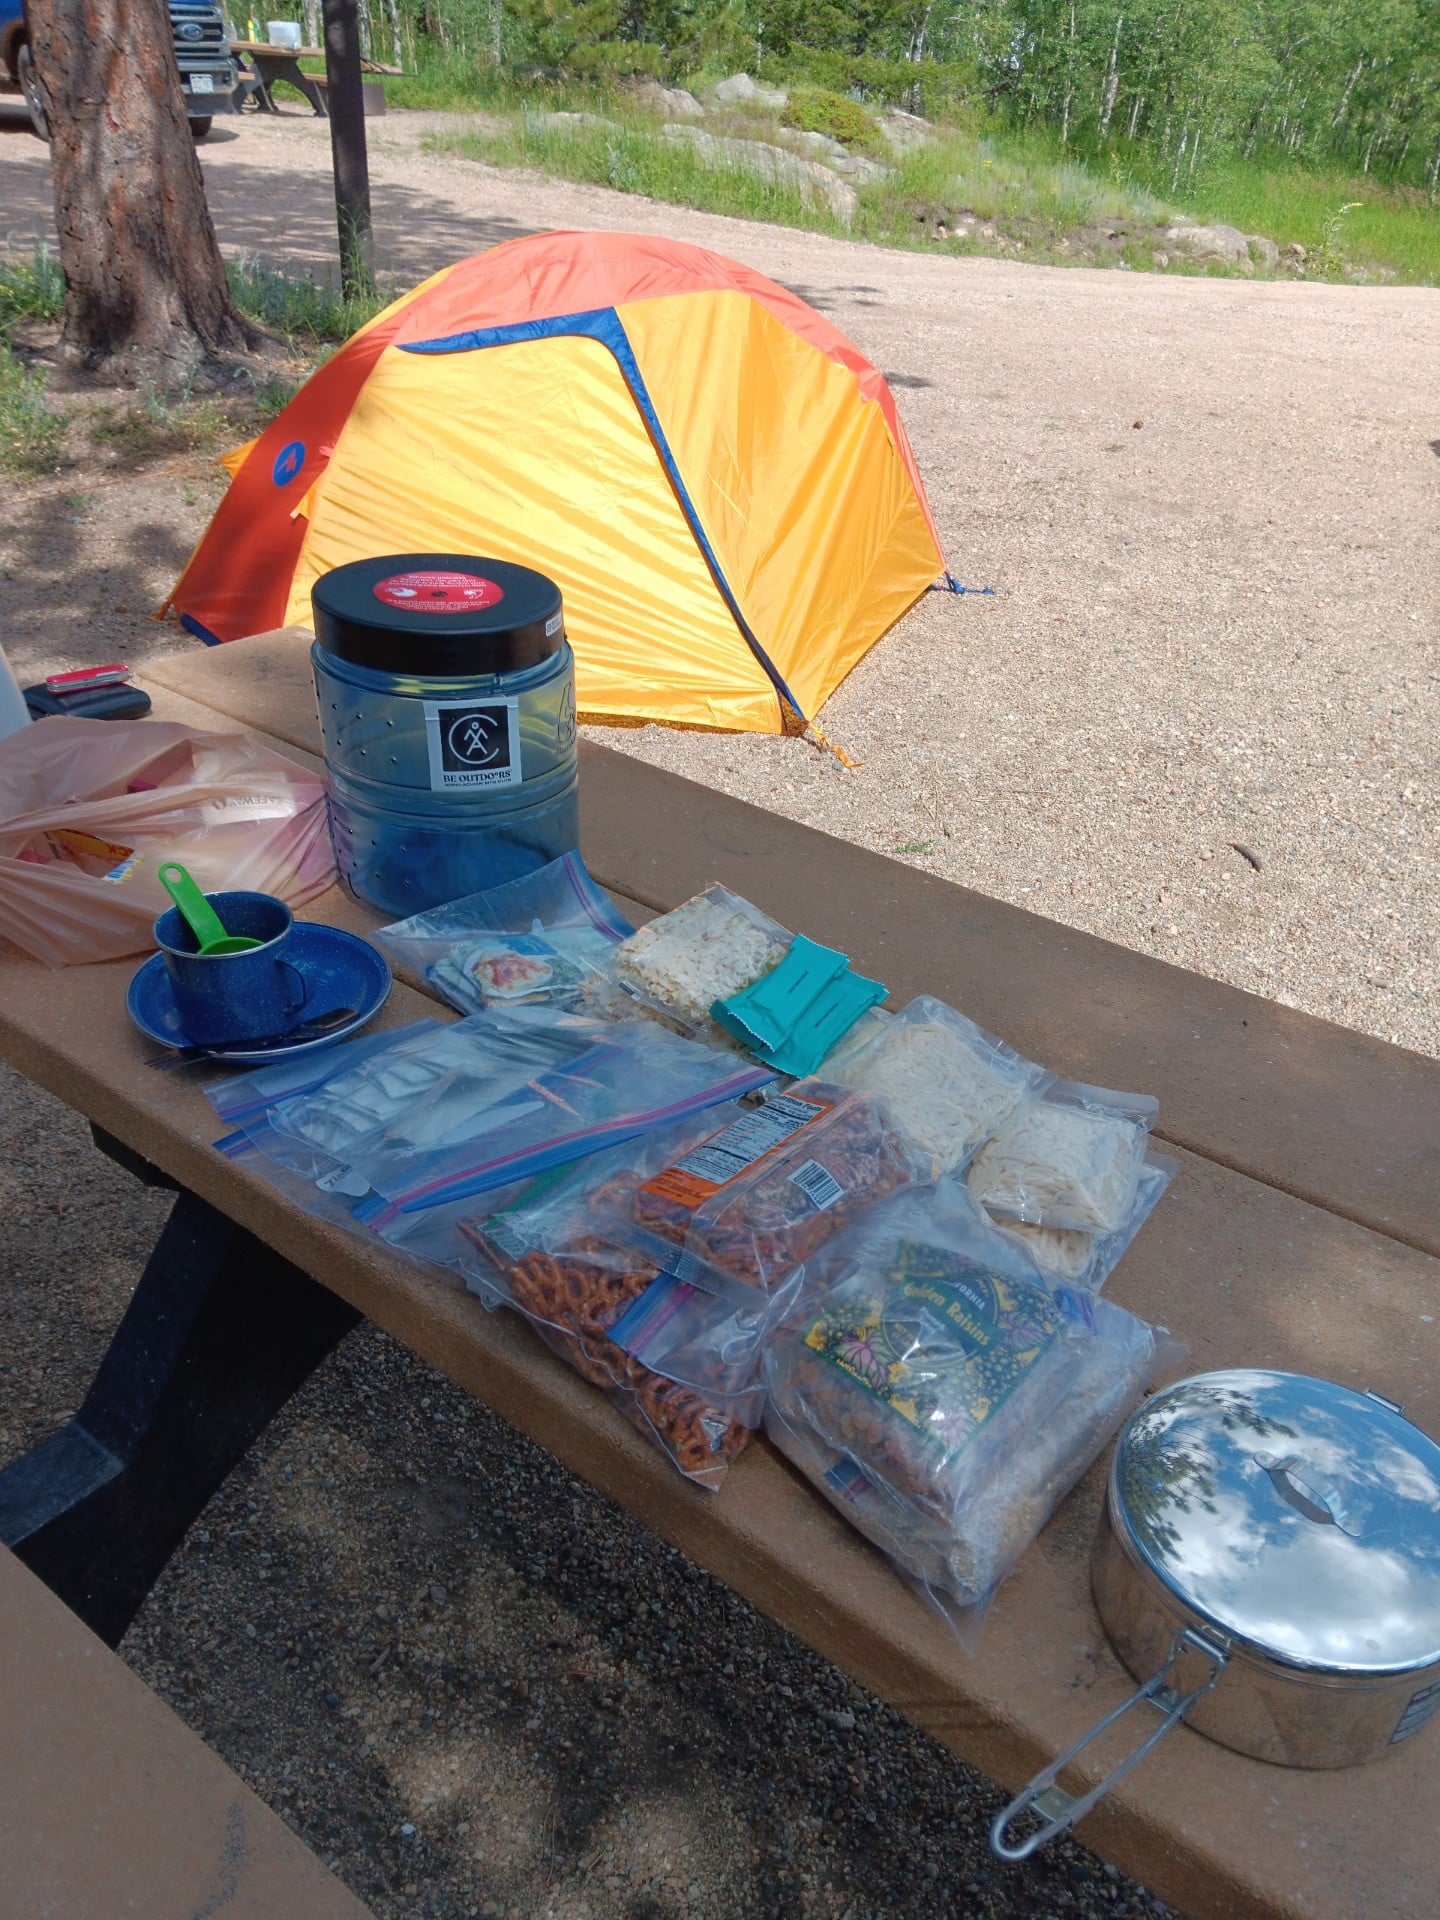 Backpacking supplies on a picnic table.